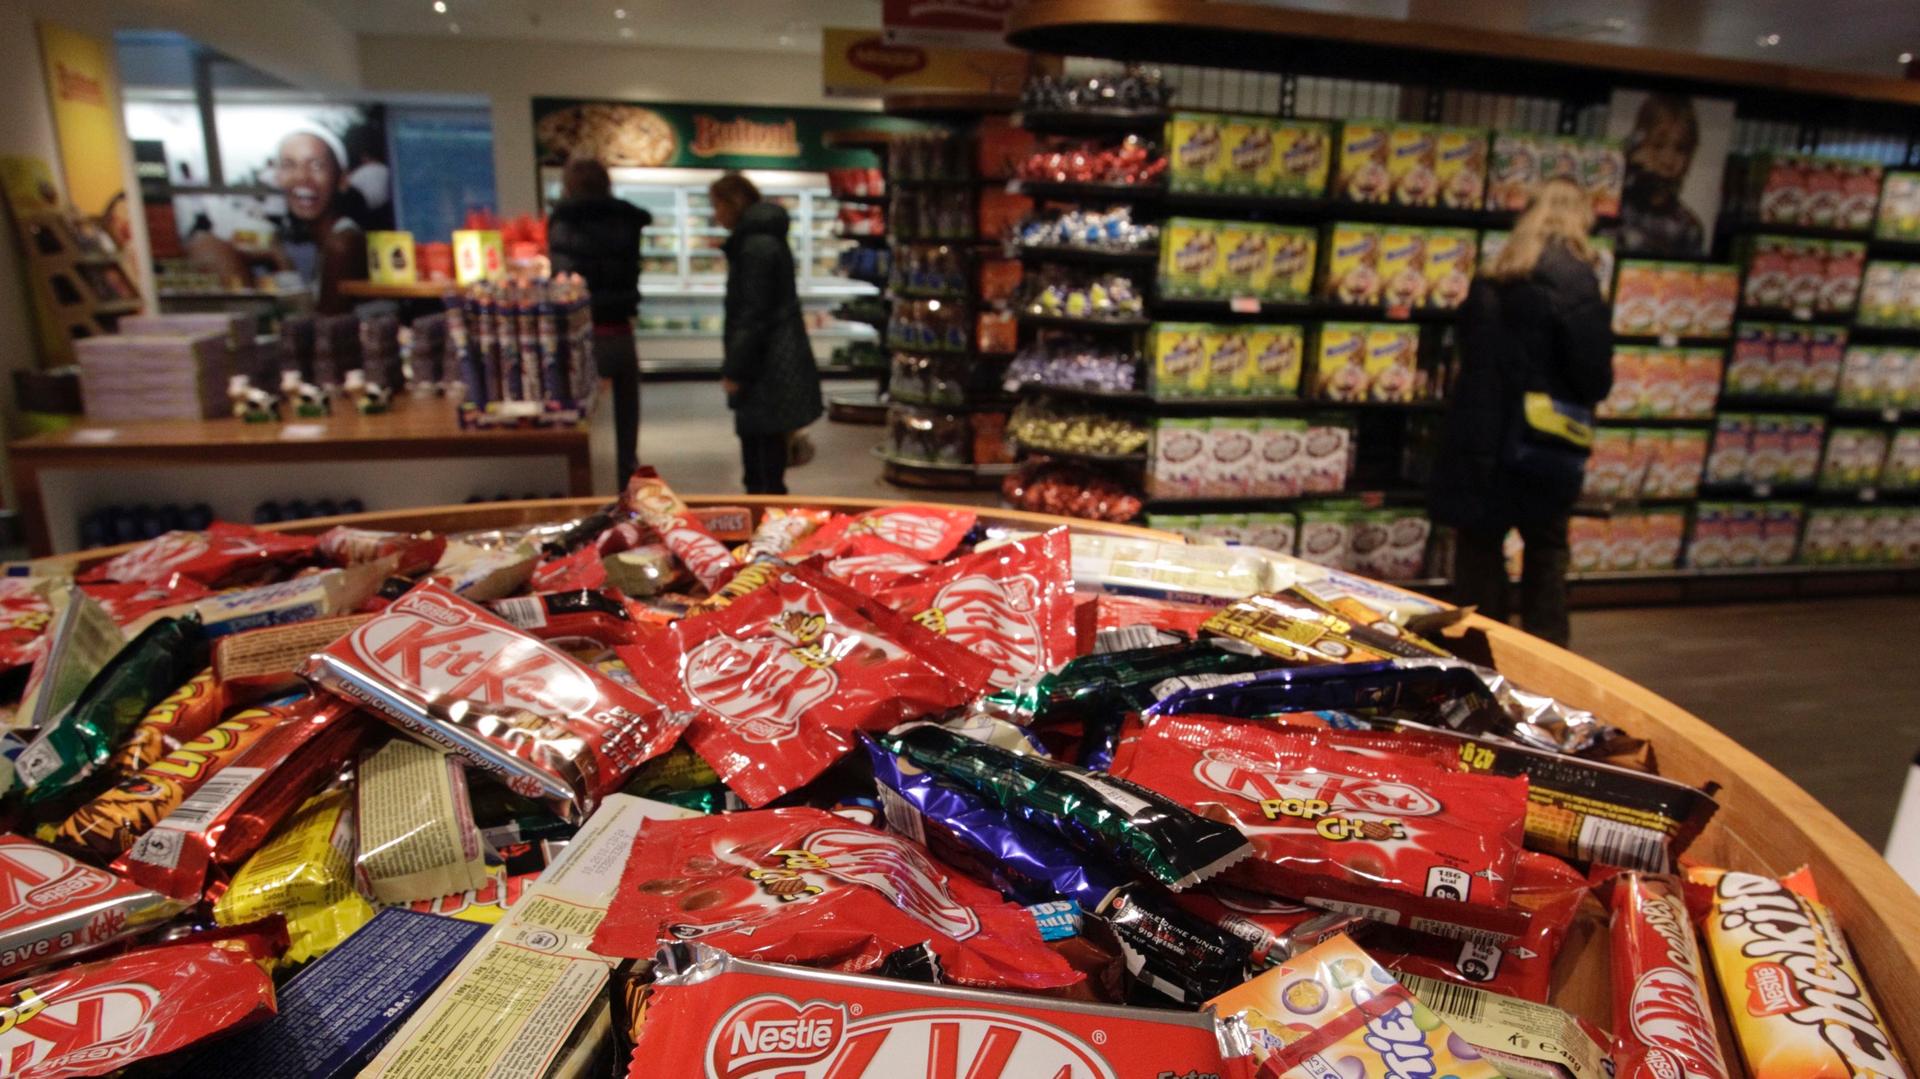 Different types of chocolate bars are seen in the company supermarket at the Nestle headquarters in Vevey, Switzerland, Feb. 19, 2010. Nestle, the world's biggest food group, is aiming for higher underlying sales growth in 2010 after a robust performance 